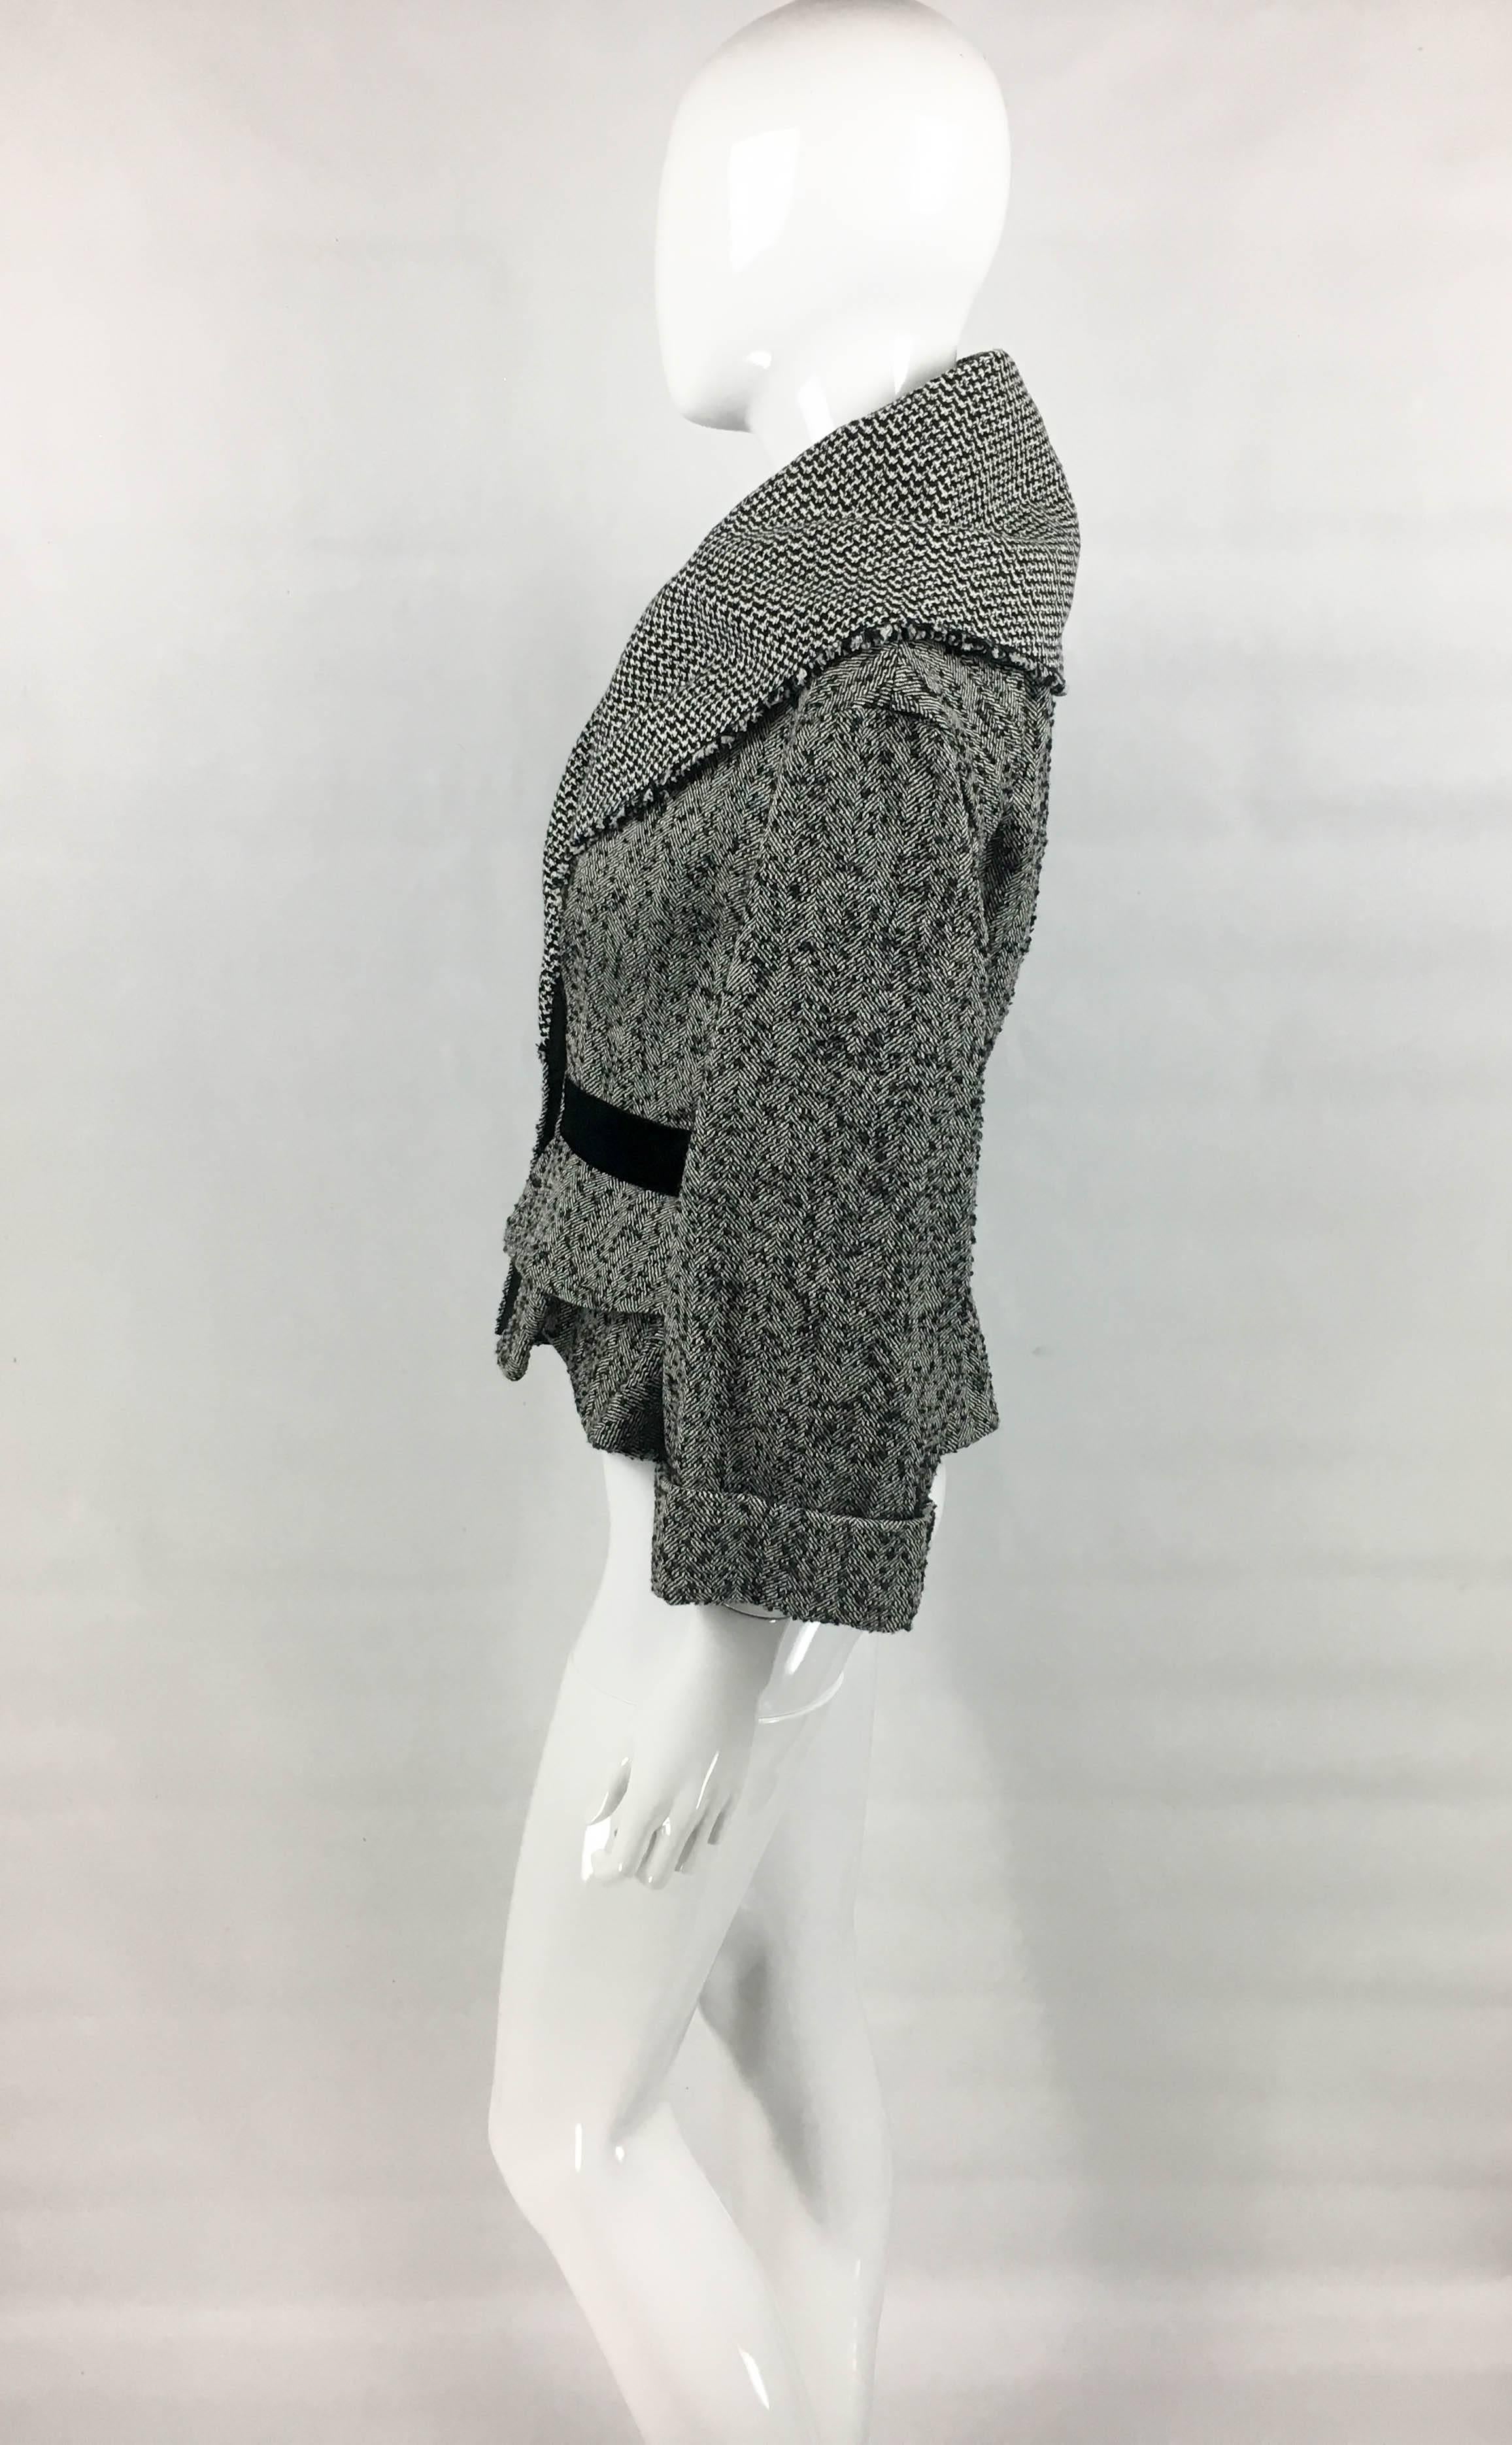 Louis Vuitton Black and White Tweed Jacket With Dramatic Collar - 21st Century 3